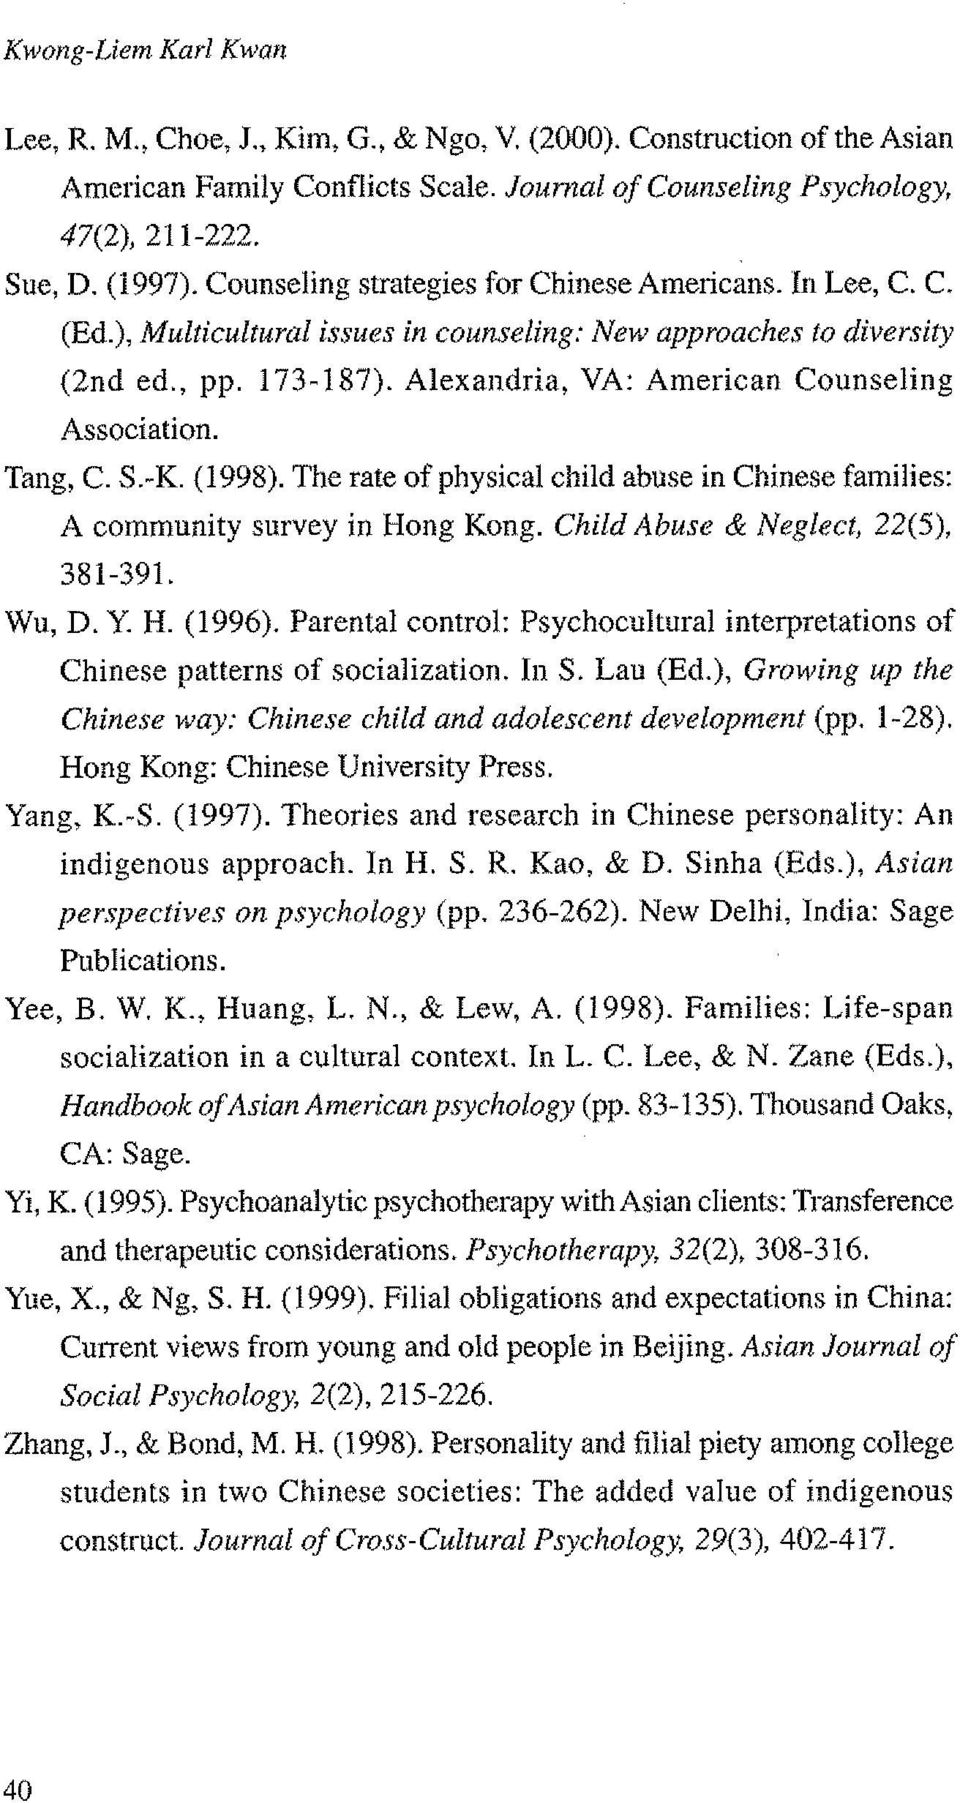 Alexandria, VA: American Counseling Association. Tang, C. S.-K. (1998). The rate of physical child abuse in Chinese families: A community survey in Hong Kong. Child Abuse & Neglect, 22(5), 381-391.